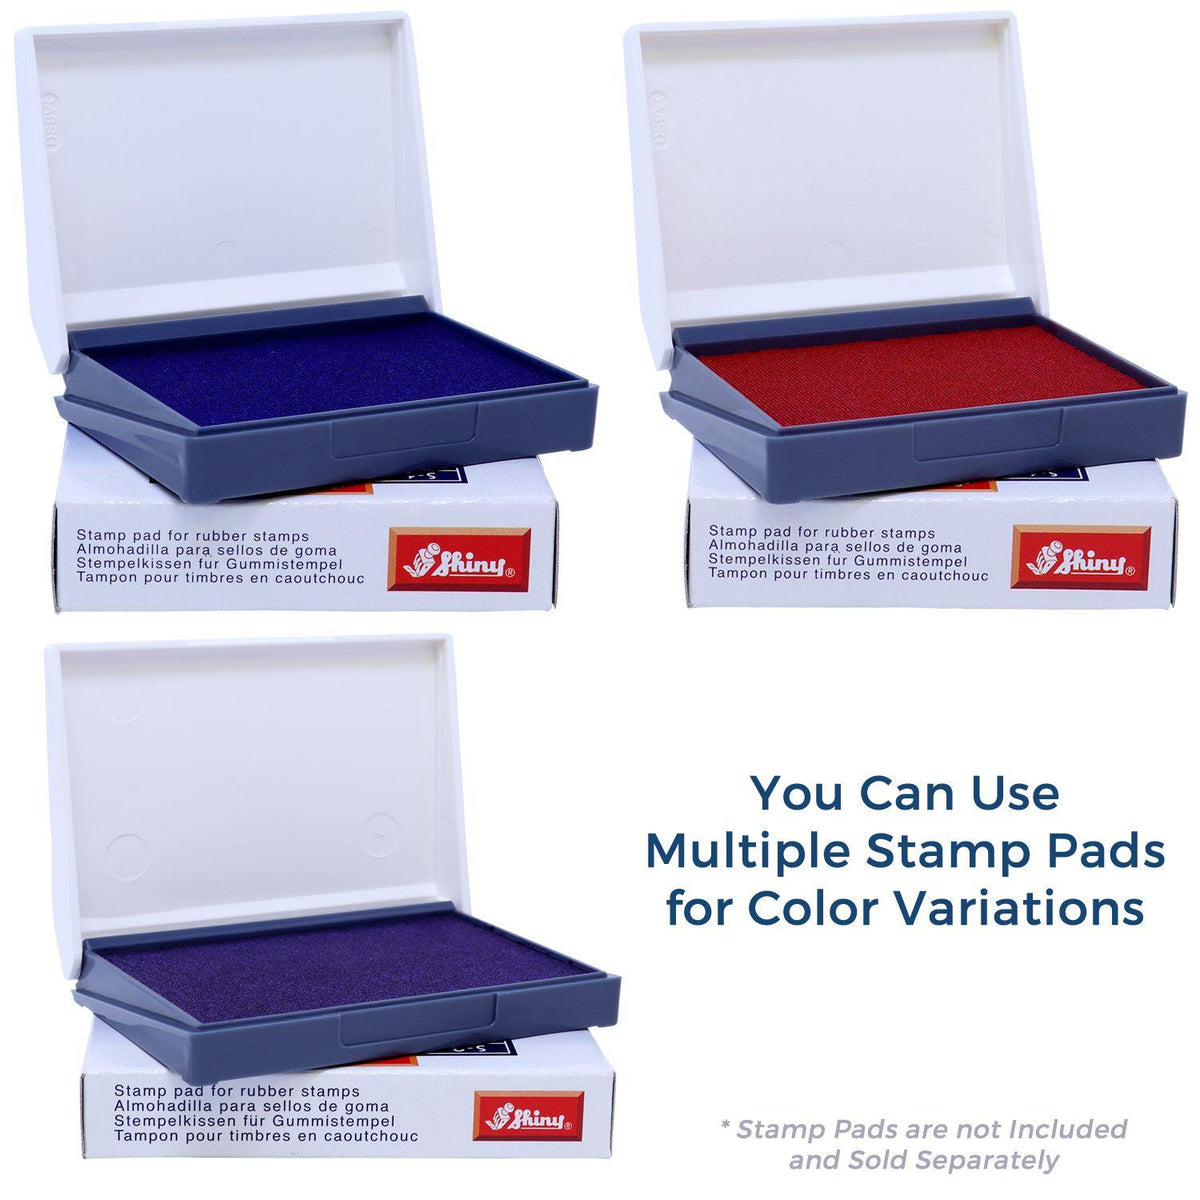 Stamp Pads for Exhibit Rubber Stamp Available